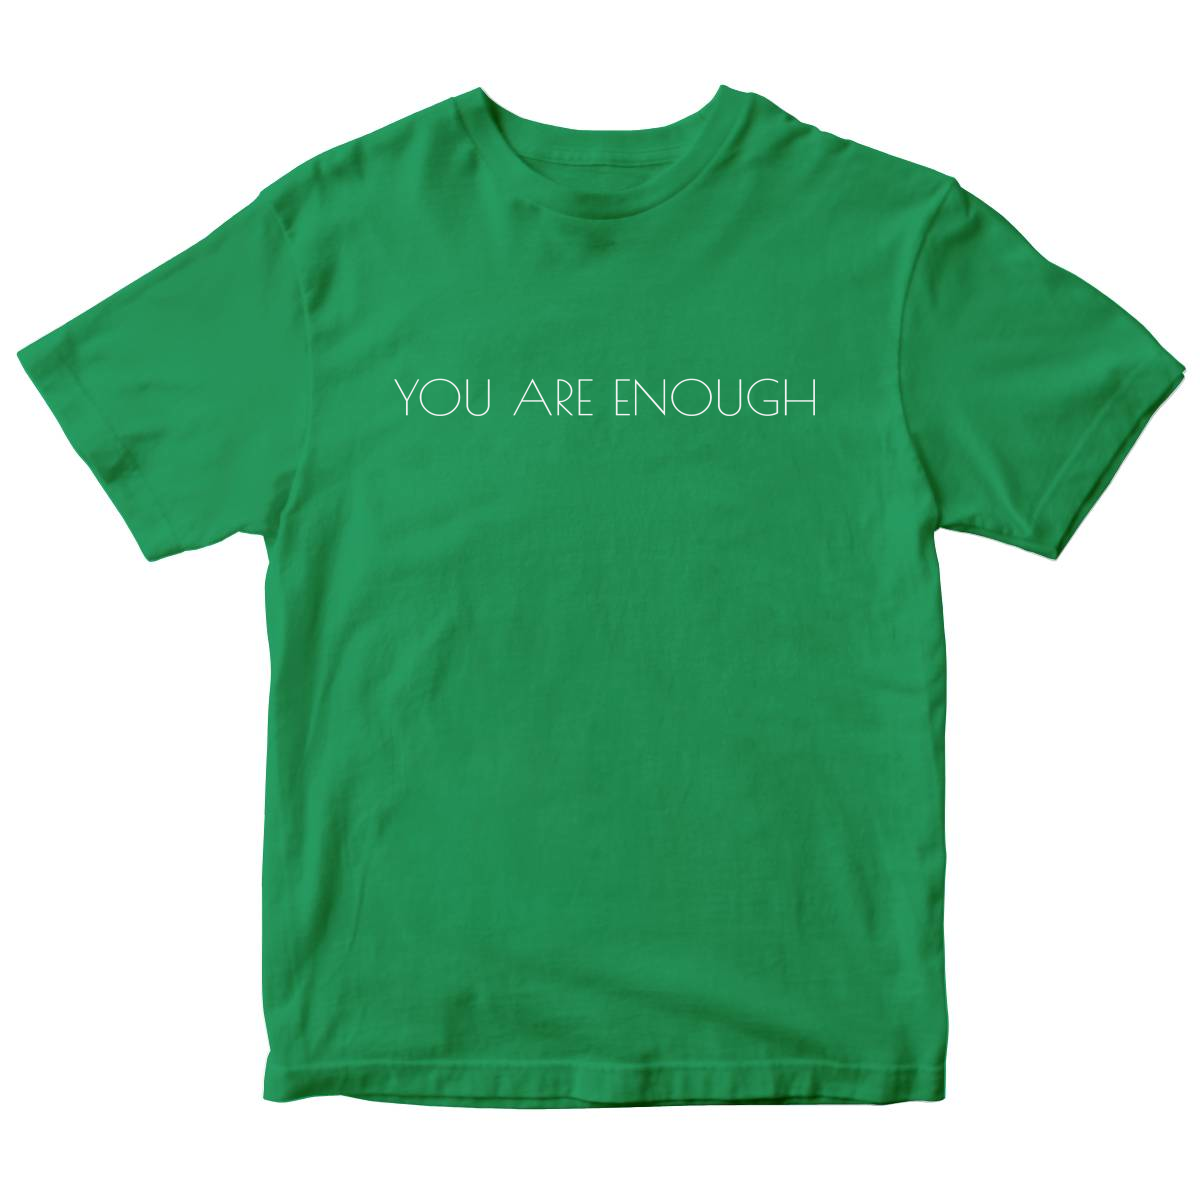 You are enough Kids T-shirt | Green